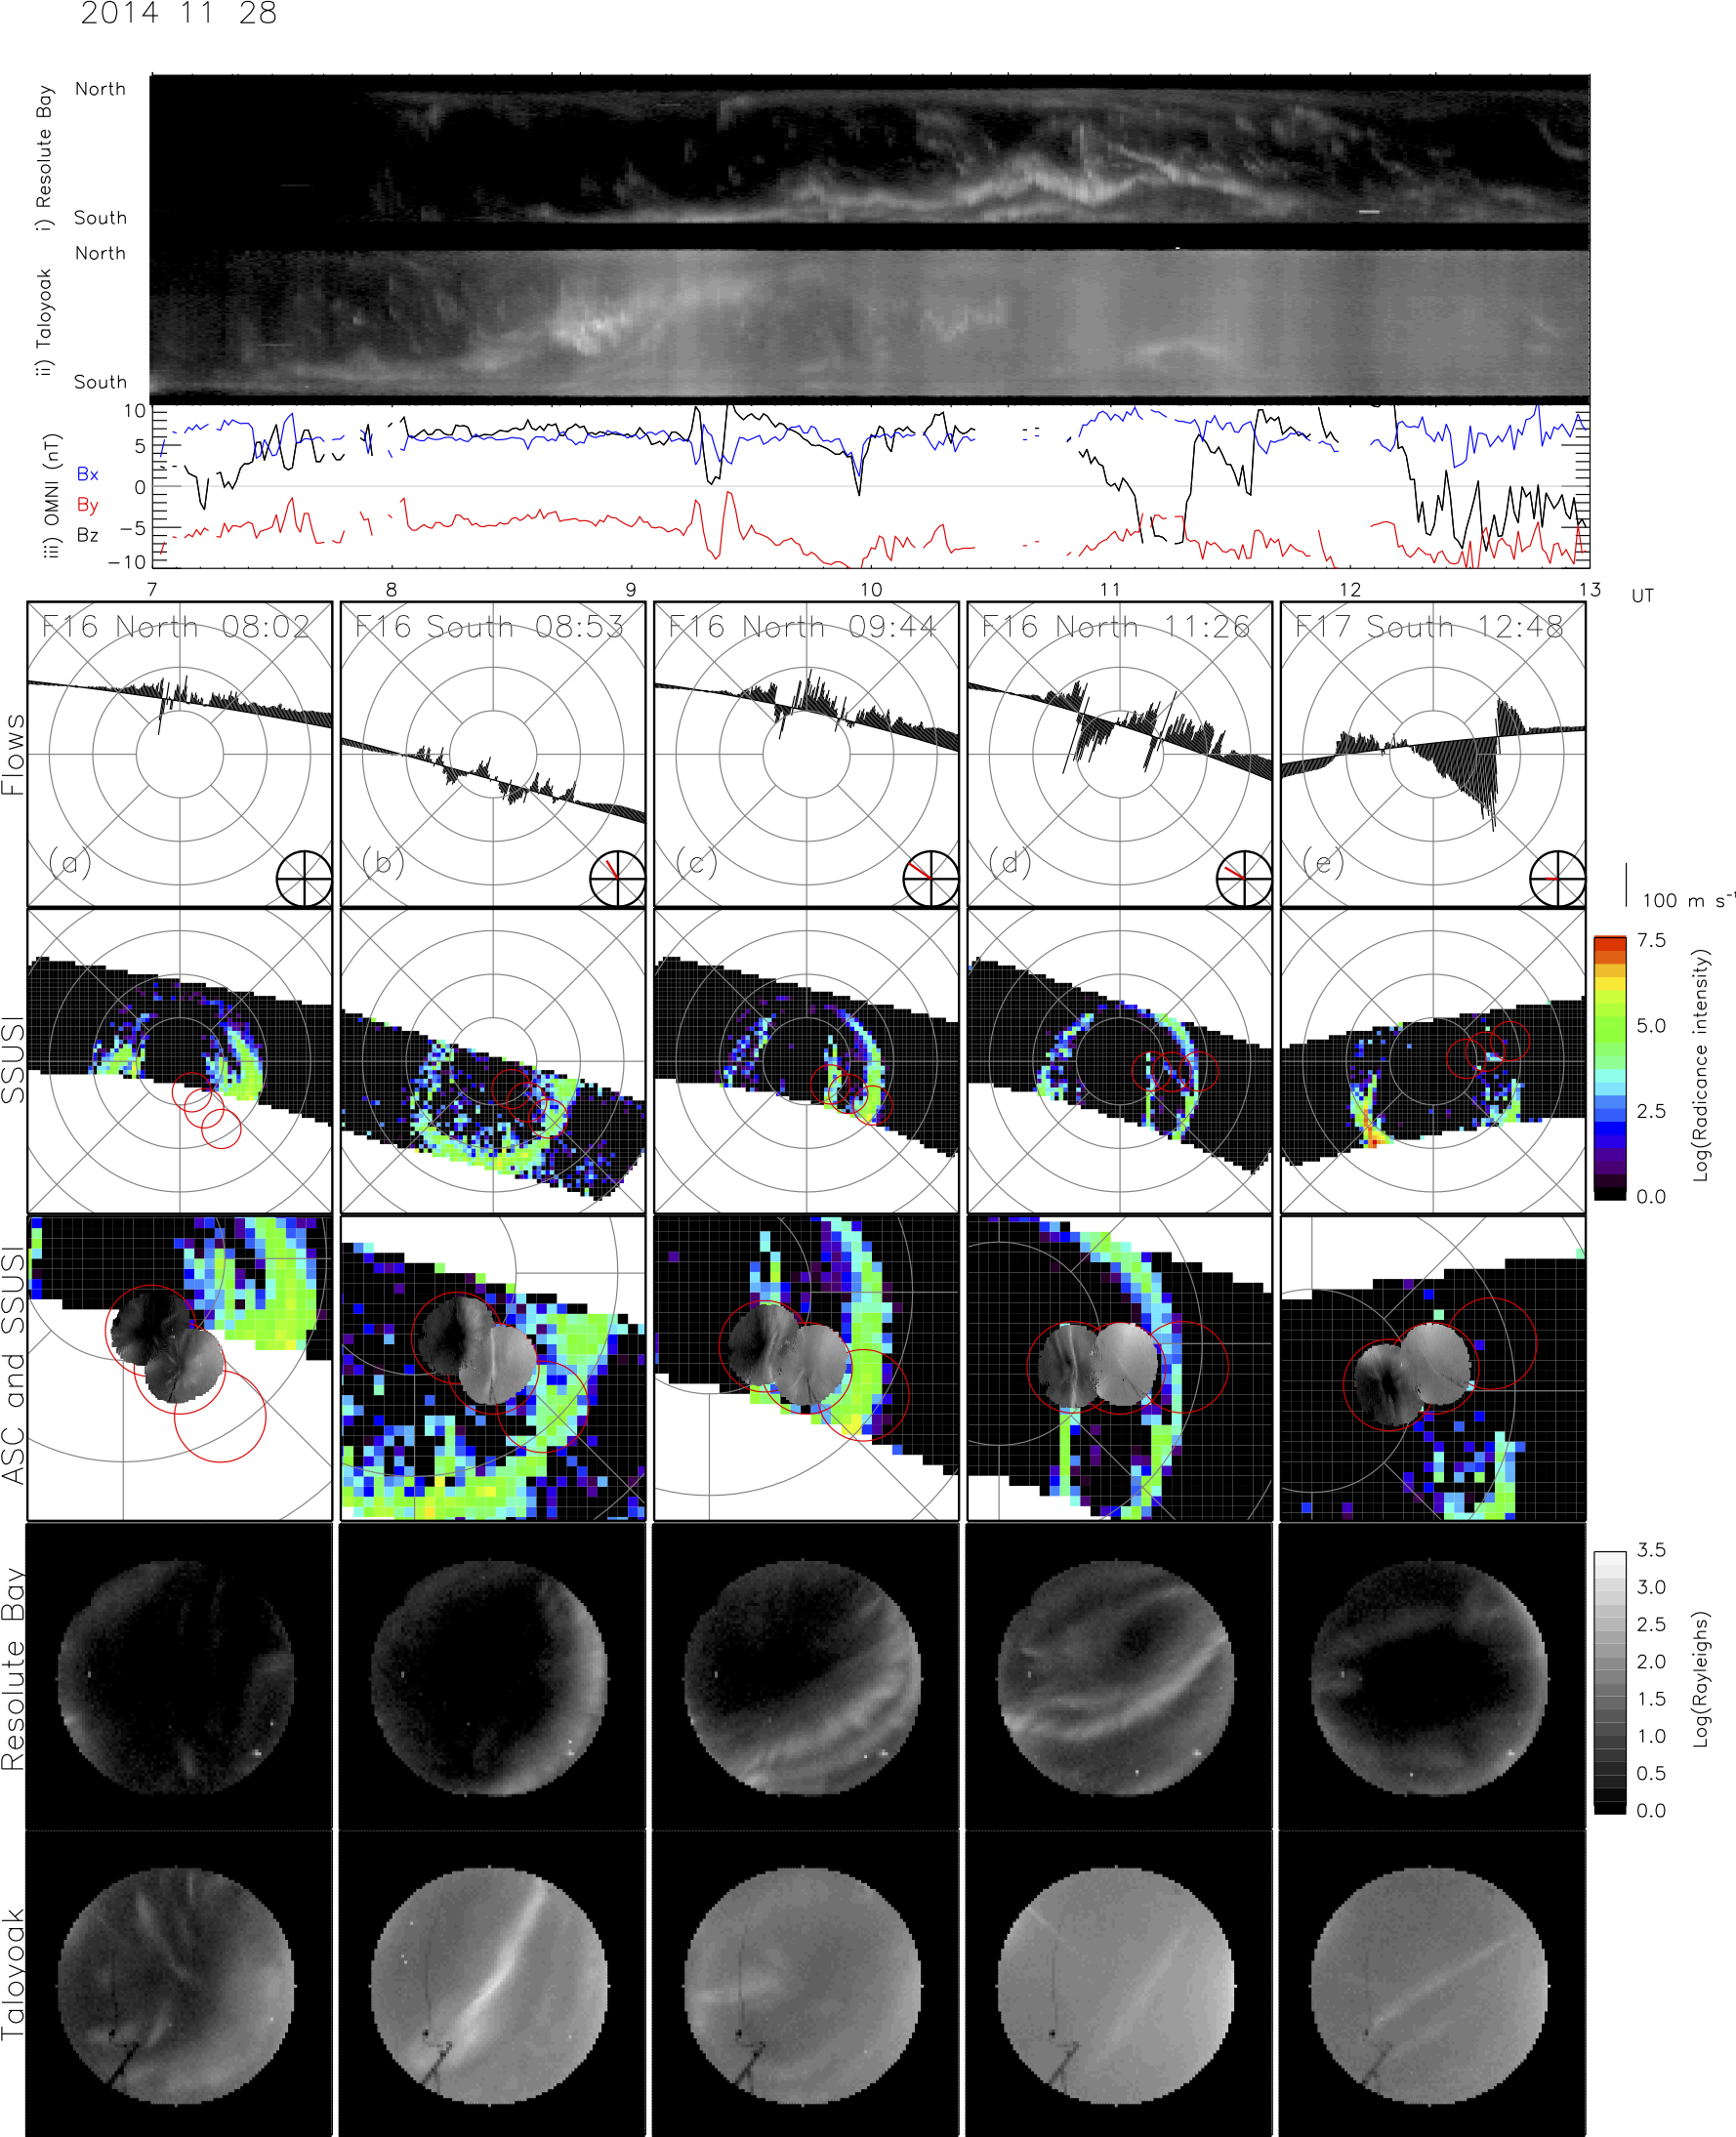 Figure 1: One of the studied events. The top panels show the keograms of the ASC and the relevant interplanetary magnetic field (IMF) data for the event. The first row of the columns shows the DMSP/IDM flows with an inset showing the IMF clock angle at the time of the SSUSI image. The second row is the LBHs SSUSI image on a log scale. The third row is the SSUSI image centred on the Taloyoak ASC station with the available ASC images projected on top. The final rows are the ASC images with north located at the top of each image plotted on a log scale. The UT given is the time of the ASC image and the most poleward point of the DMSP pass.